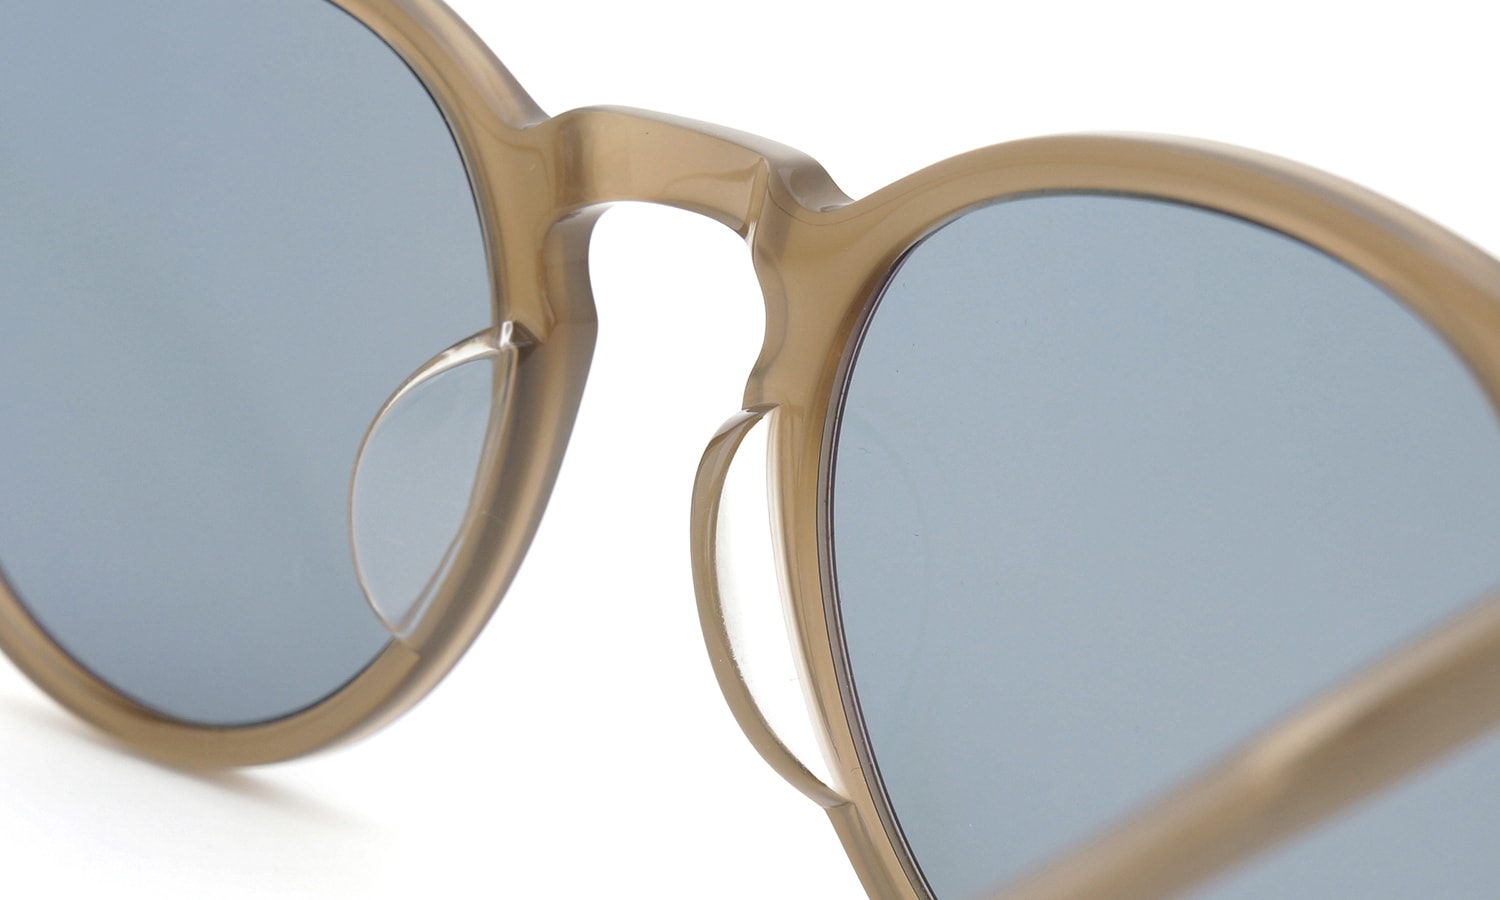 OLIVER PEOPLES×THE ROW O'Malley-NYC TB